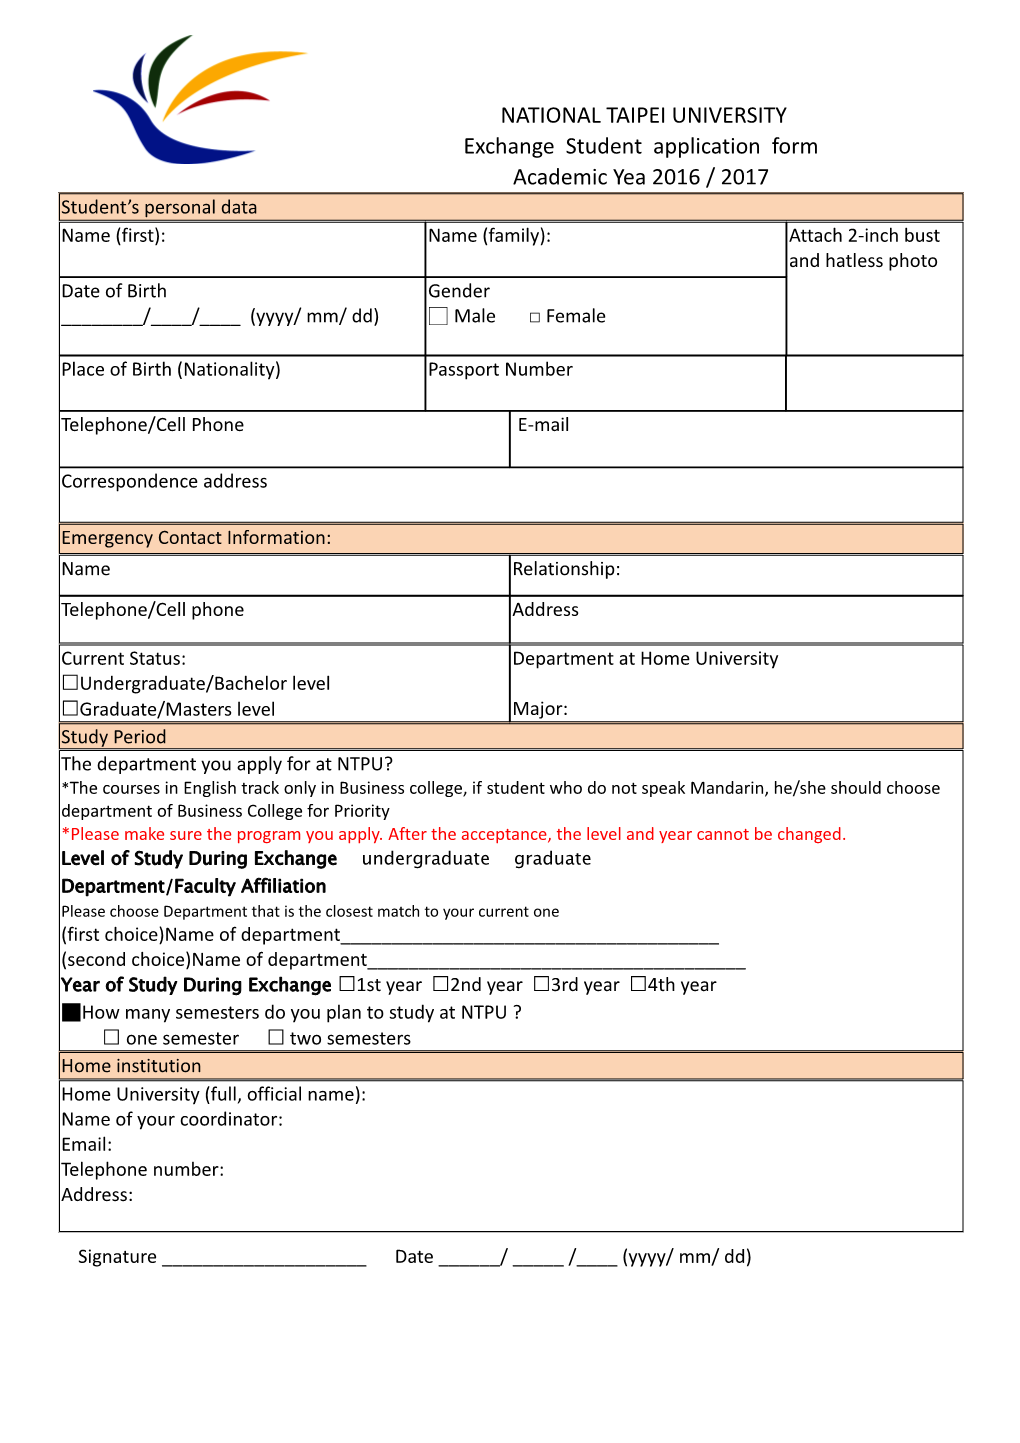 Exchange Student Application Form s1